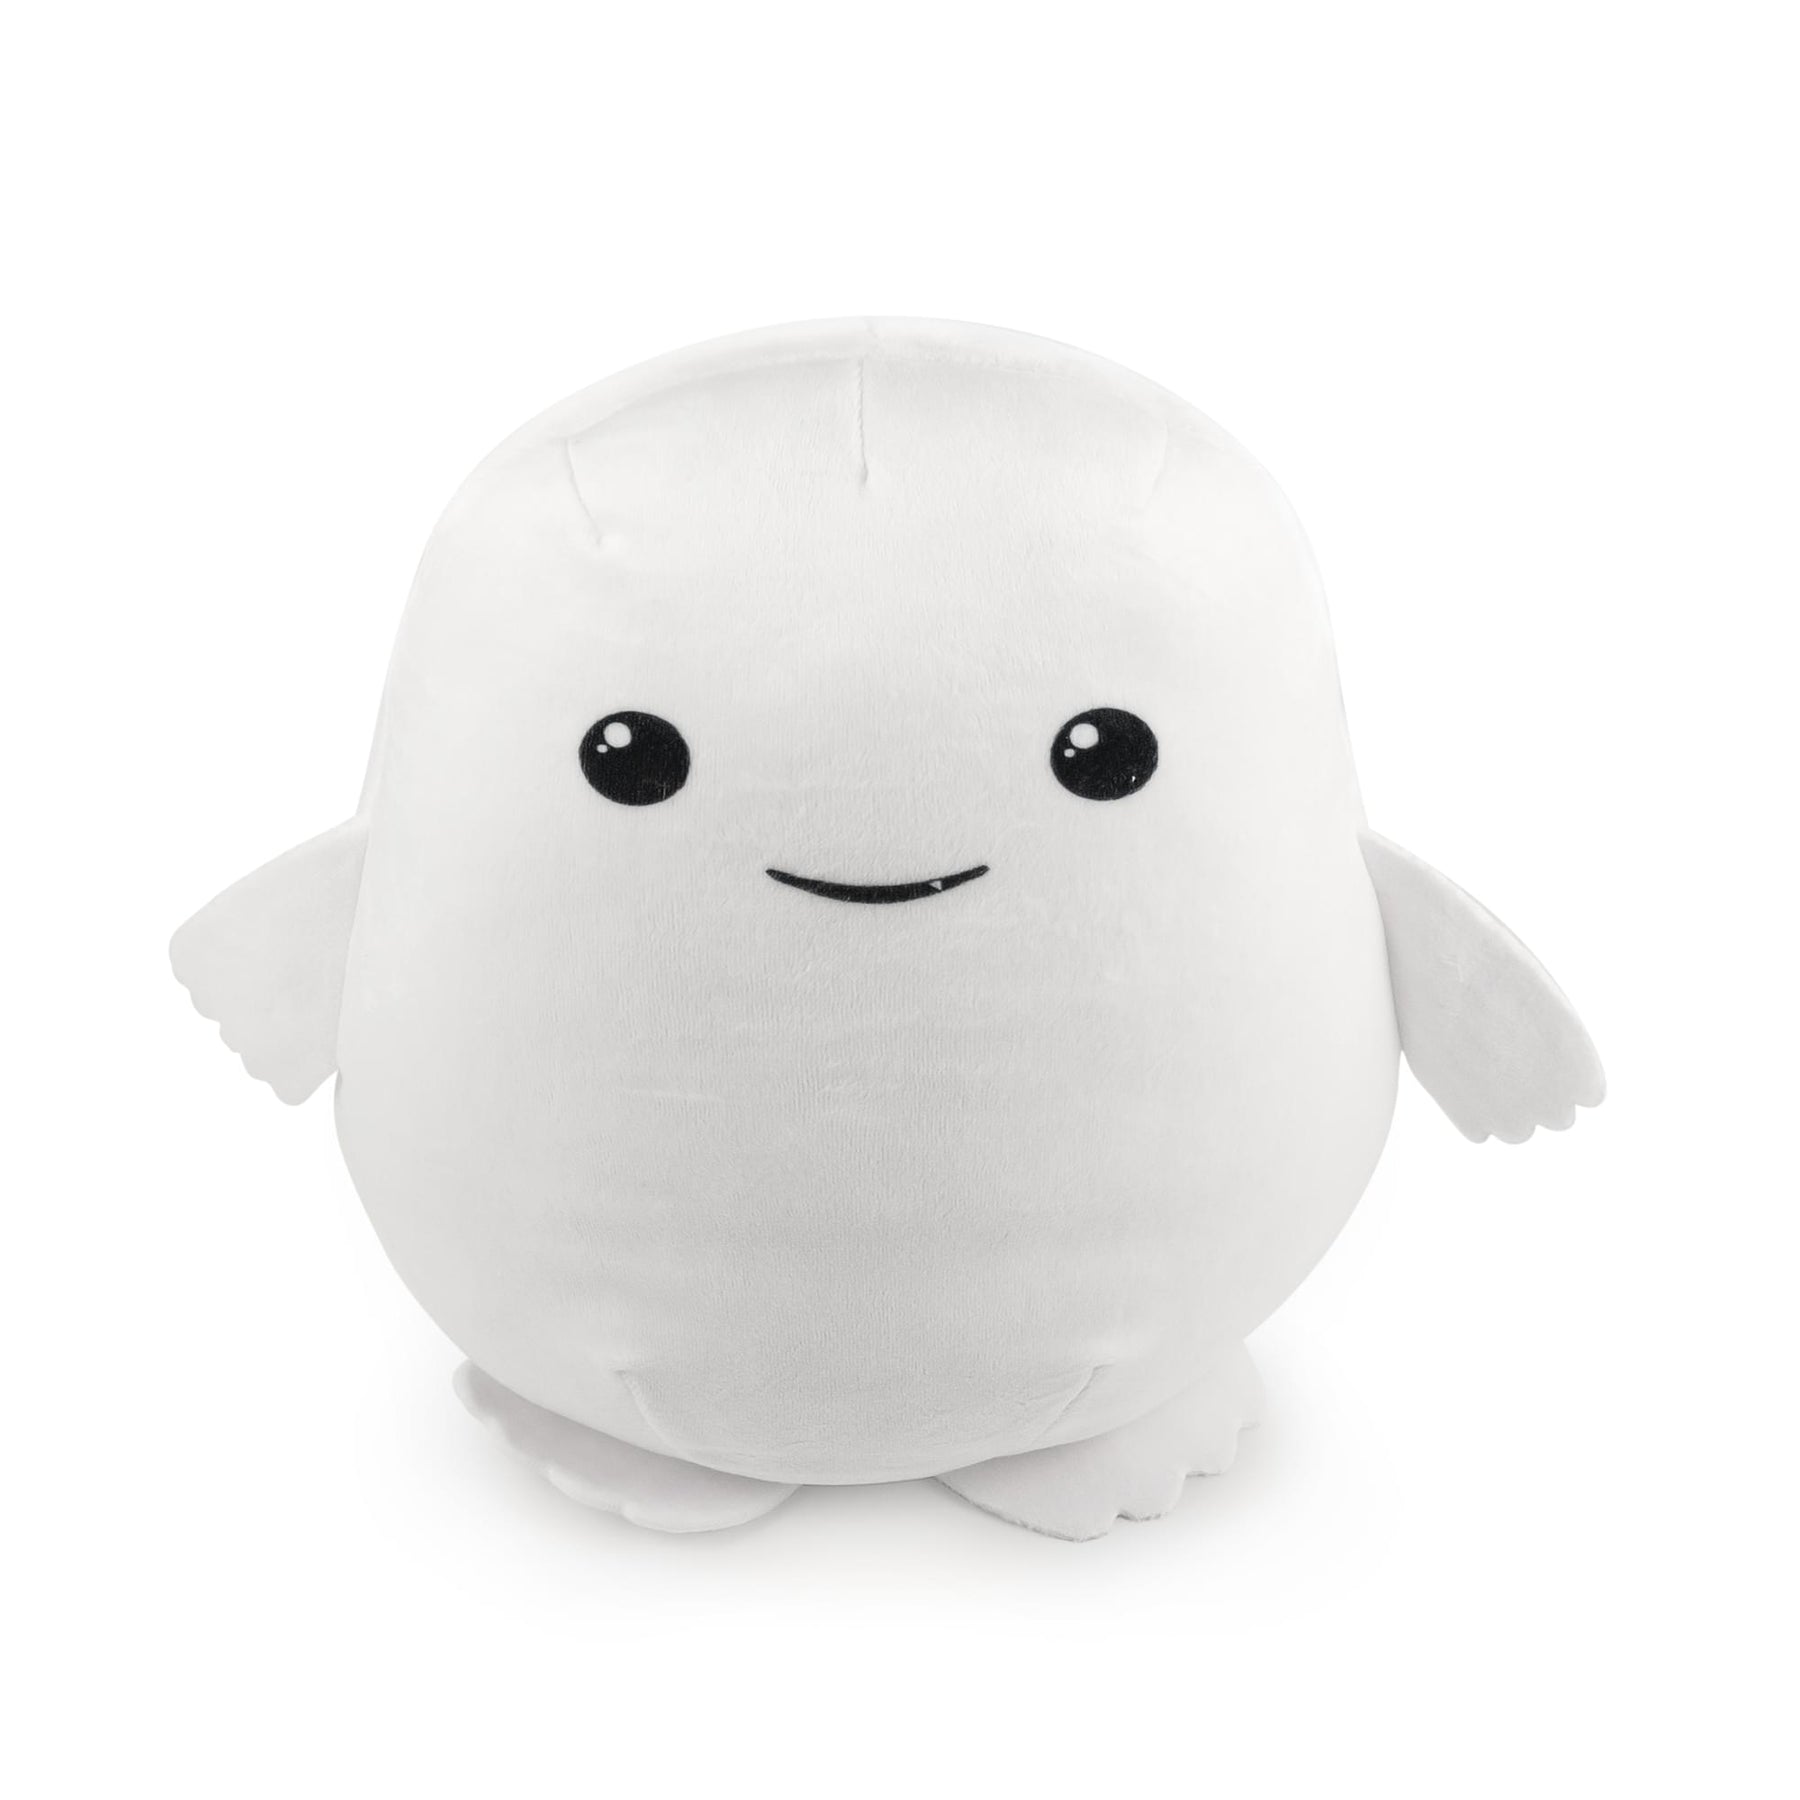 Doctor Who Adipose Collectible | Official 10-Inch Tall Doctor Who Plush Figure